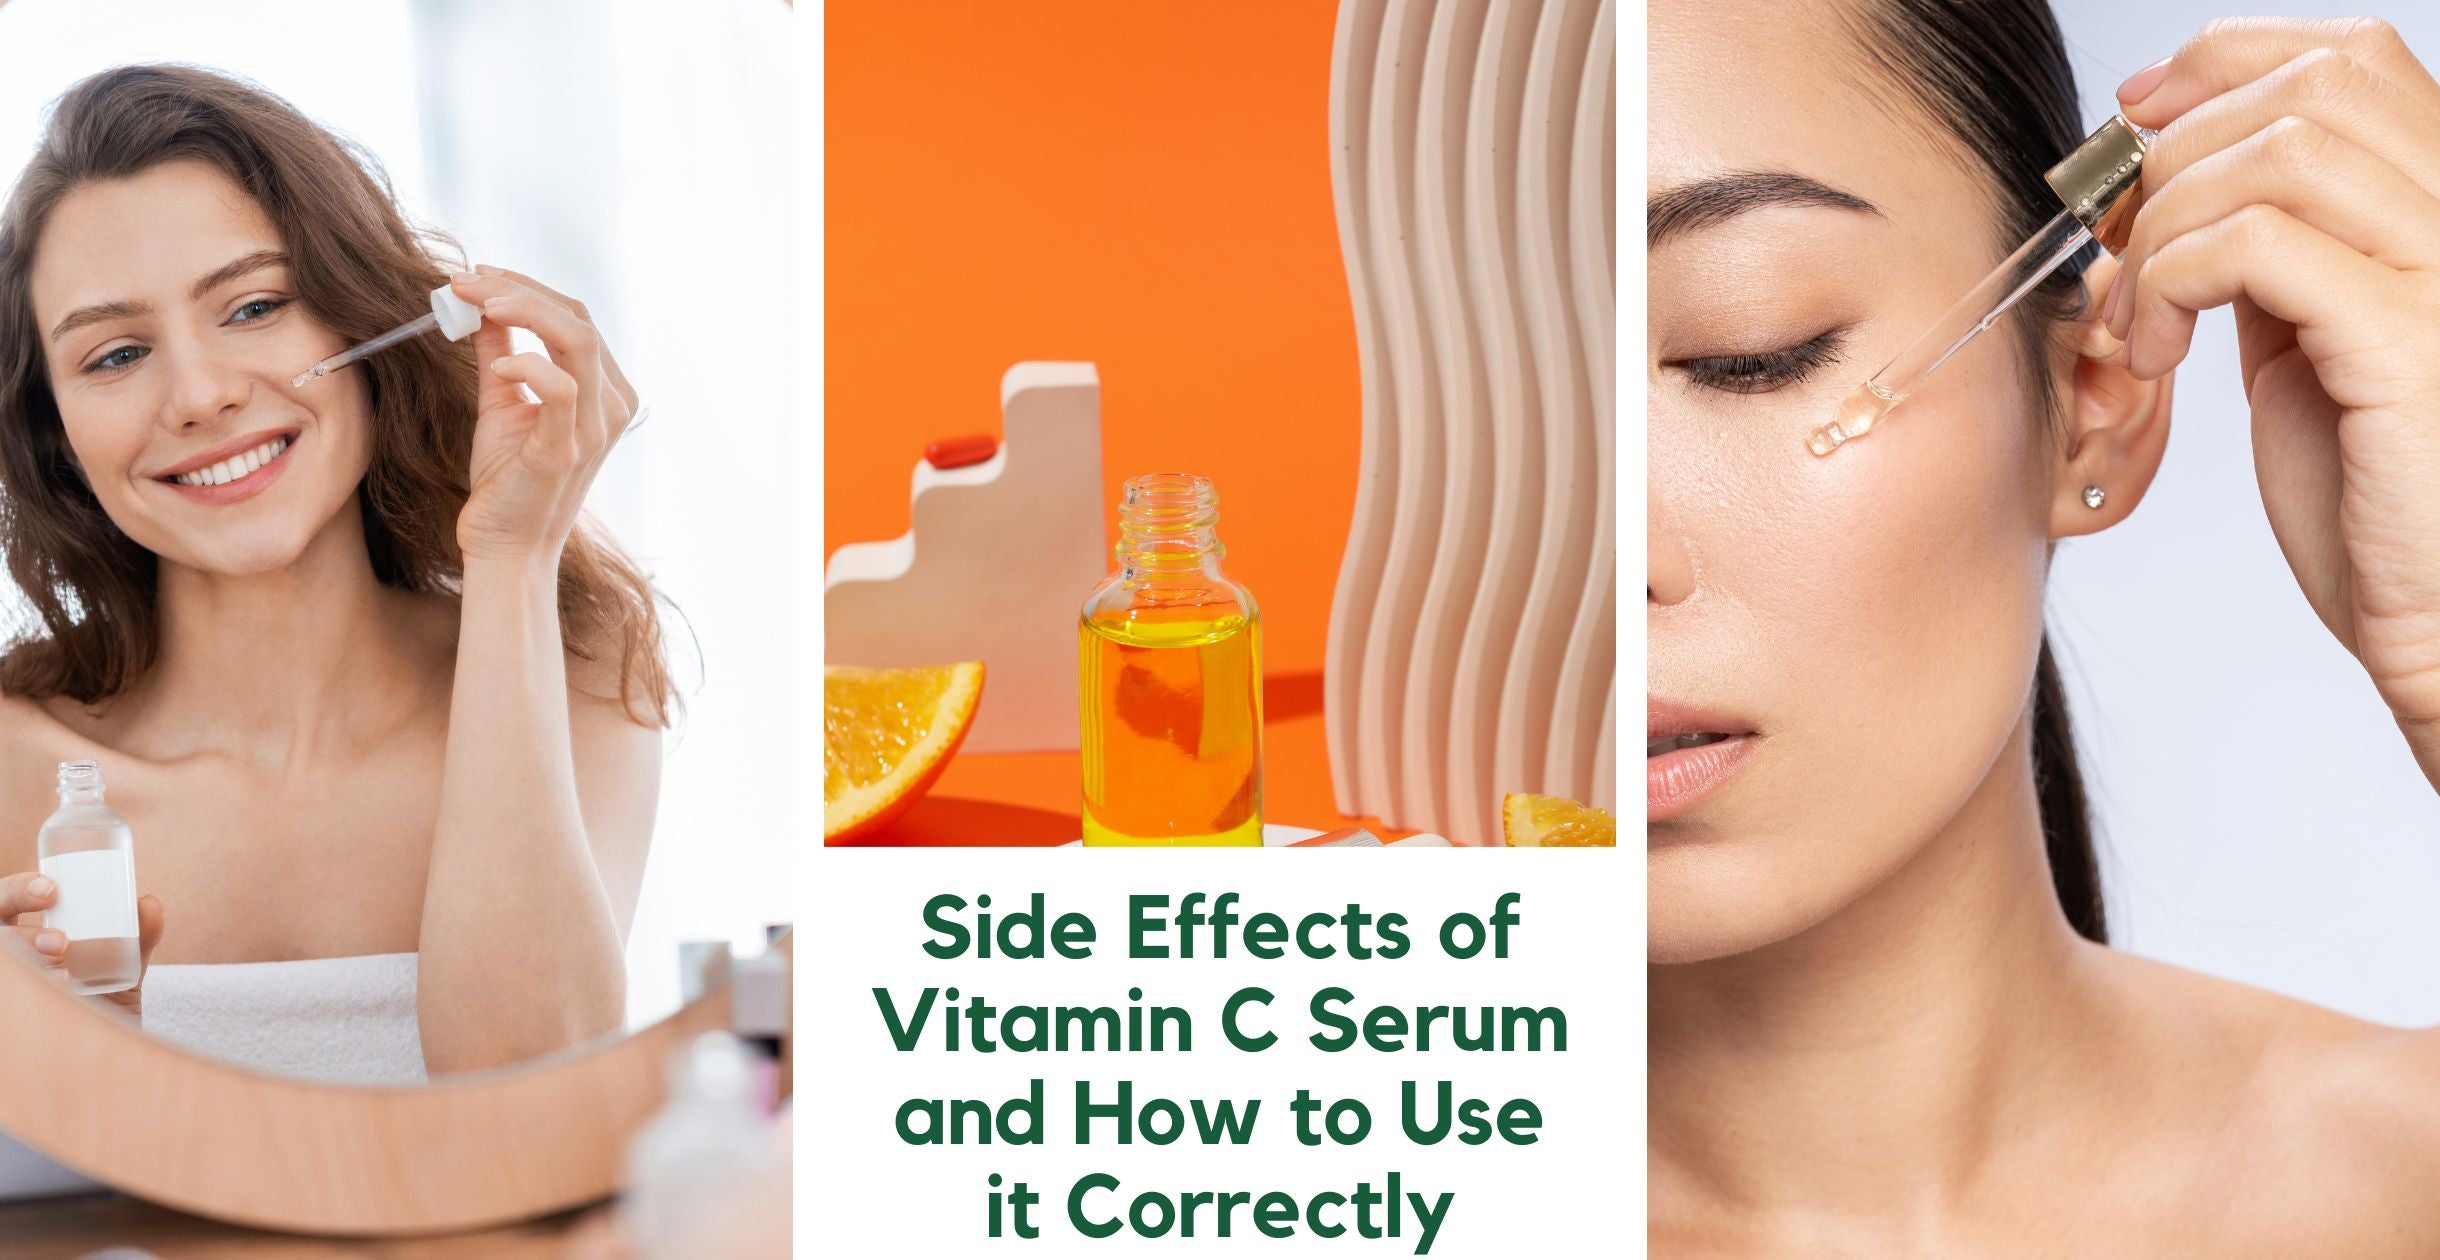 Side Effects of Vitamin C Serum and How to Use it Correctly